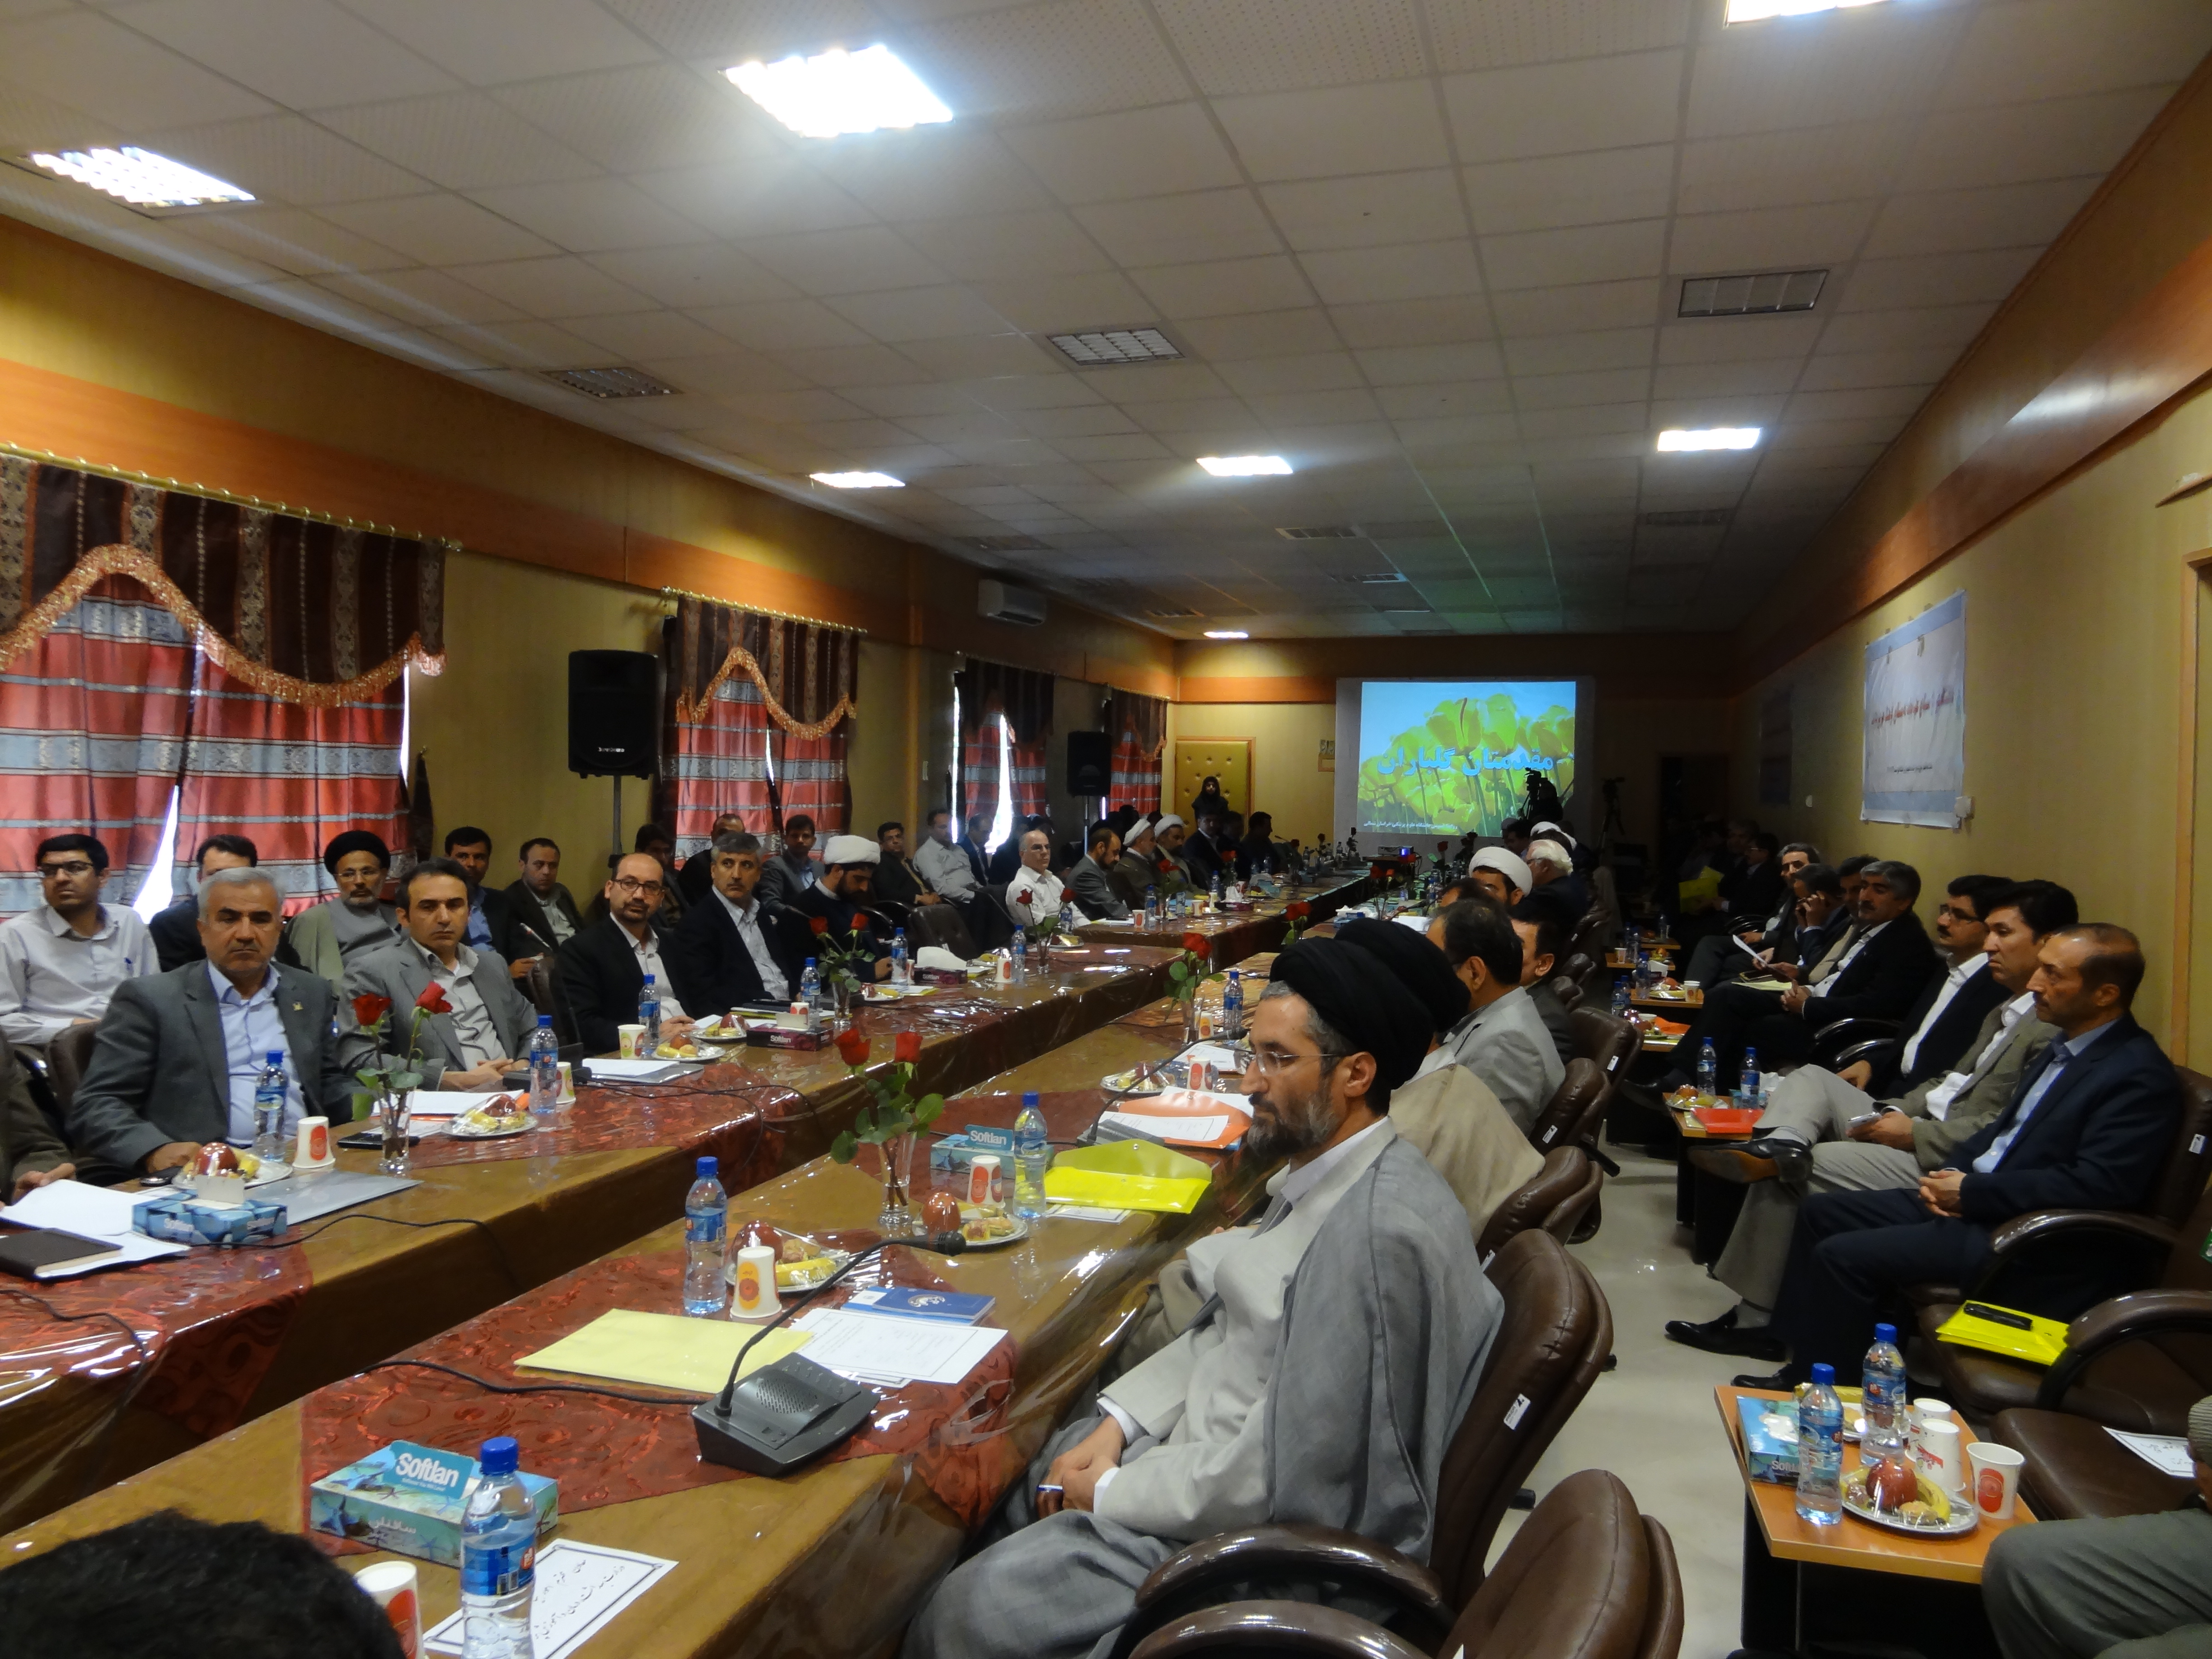 Holding a regional congress of the executive boards of recruitment of the north east universities in North Khorasan University of Medical Sciences